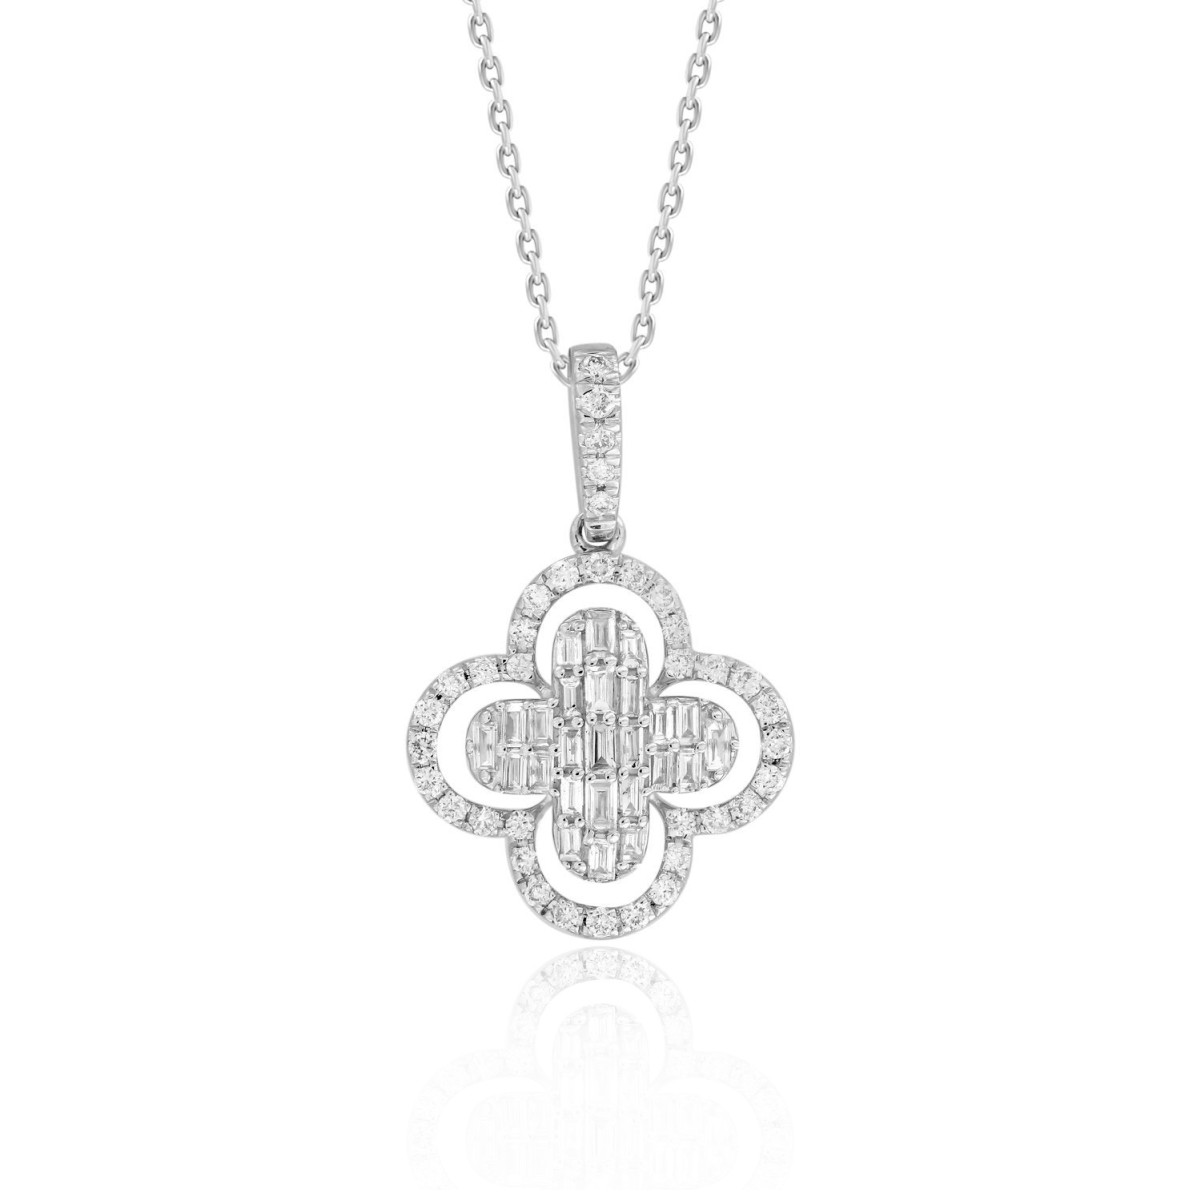 14K WHITE GOLD 3/8CT ROUND/BAGUETTE DIAMOND LADIES PENDANT WITH CHAIN 